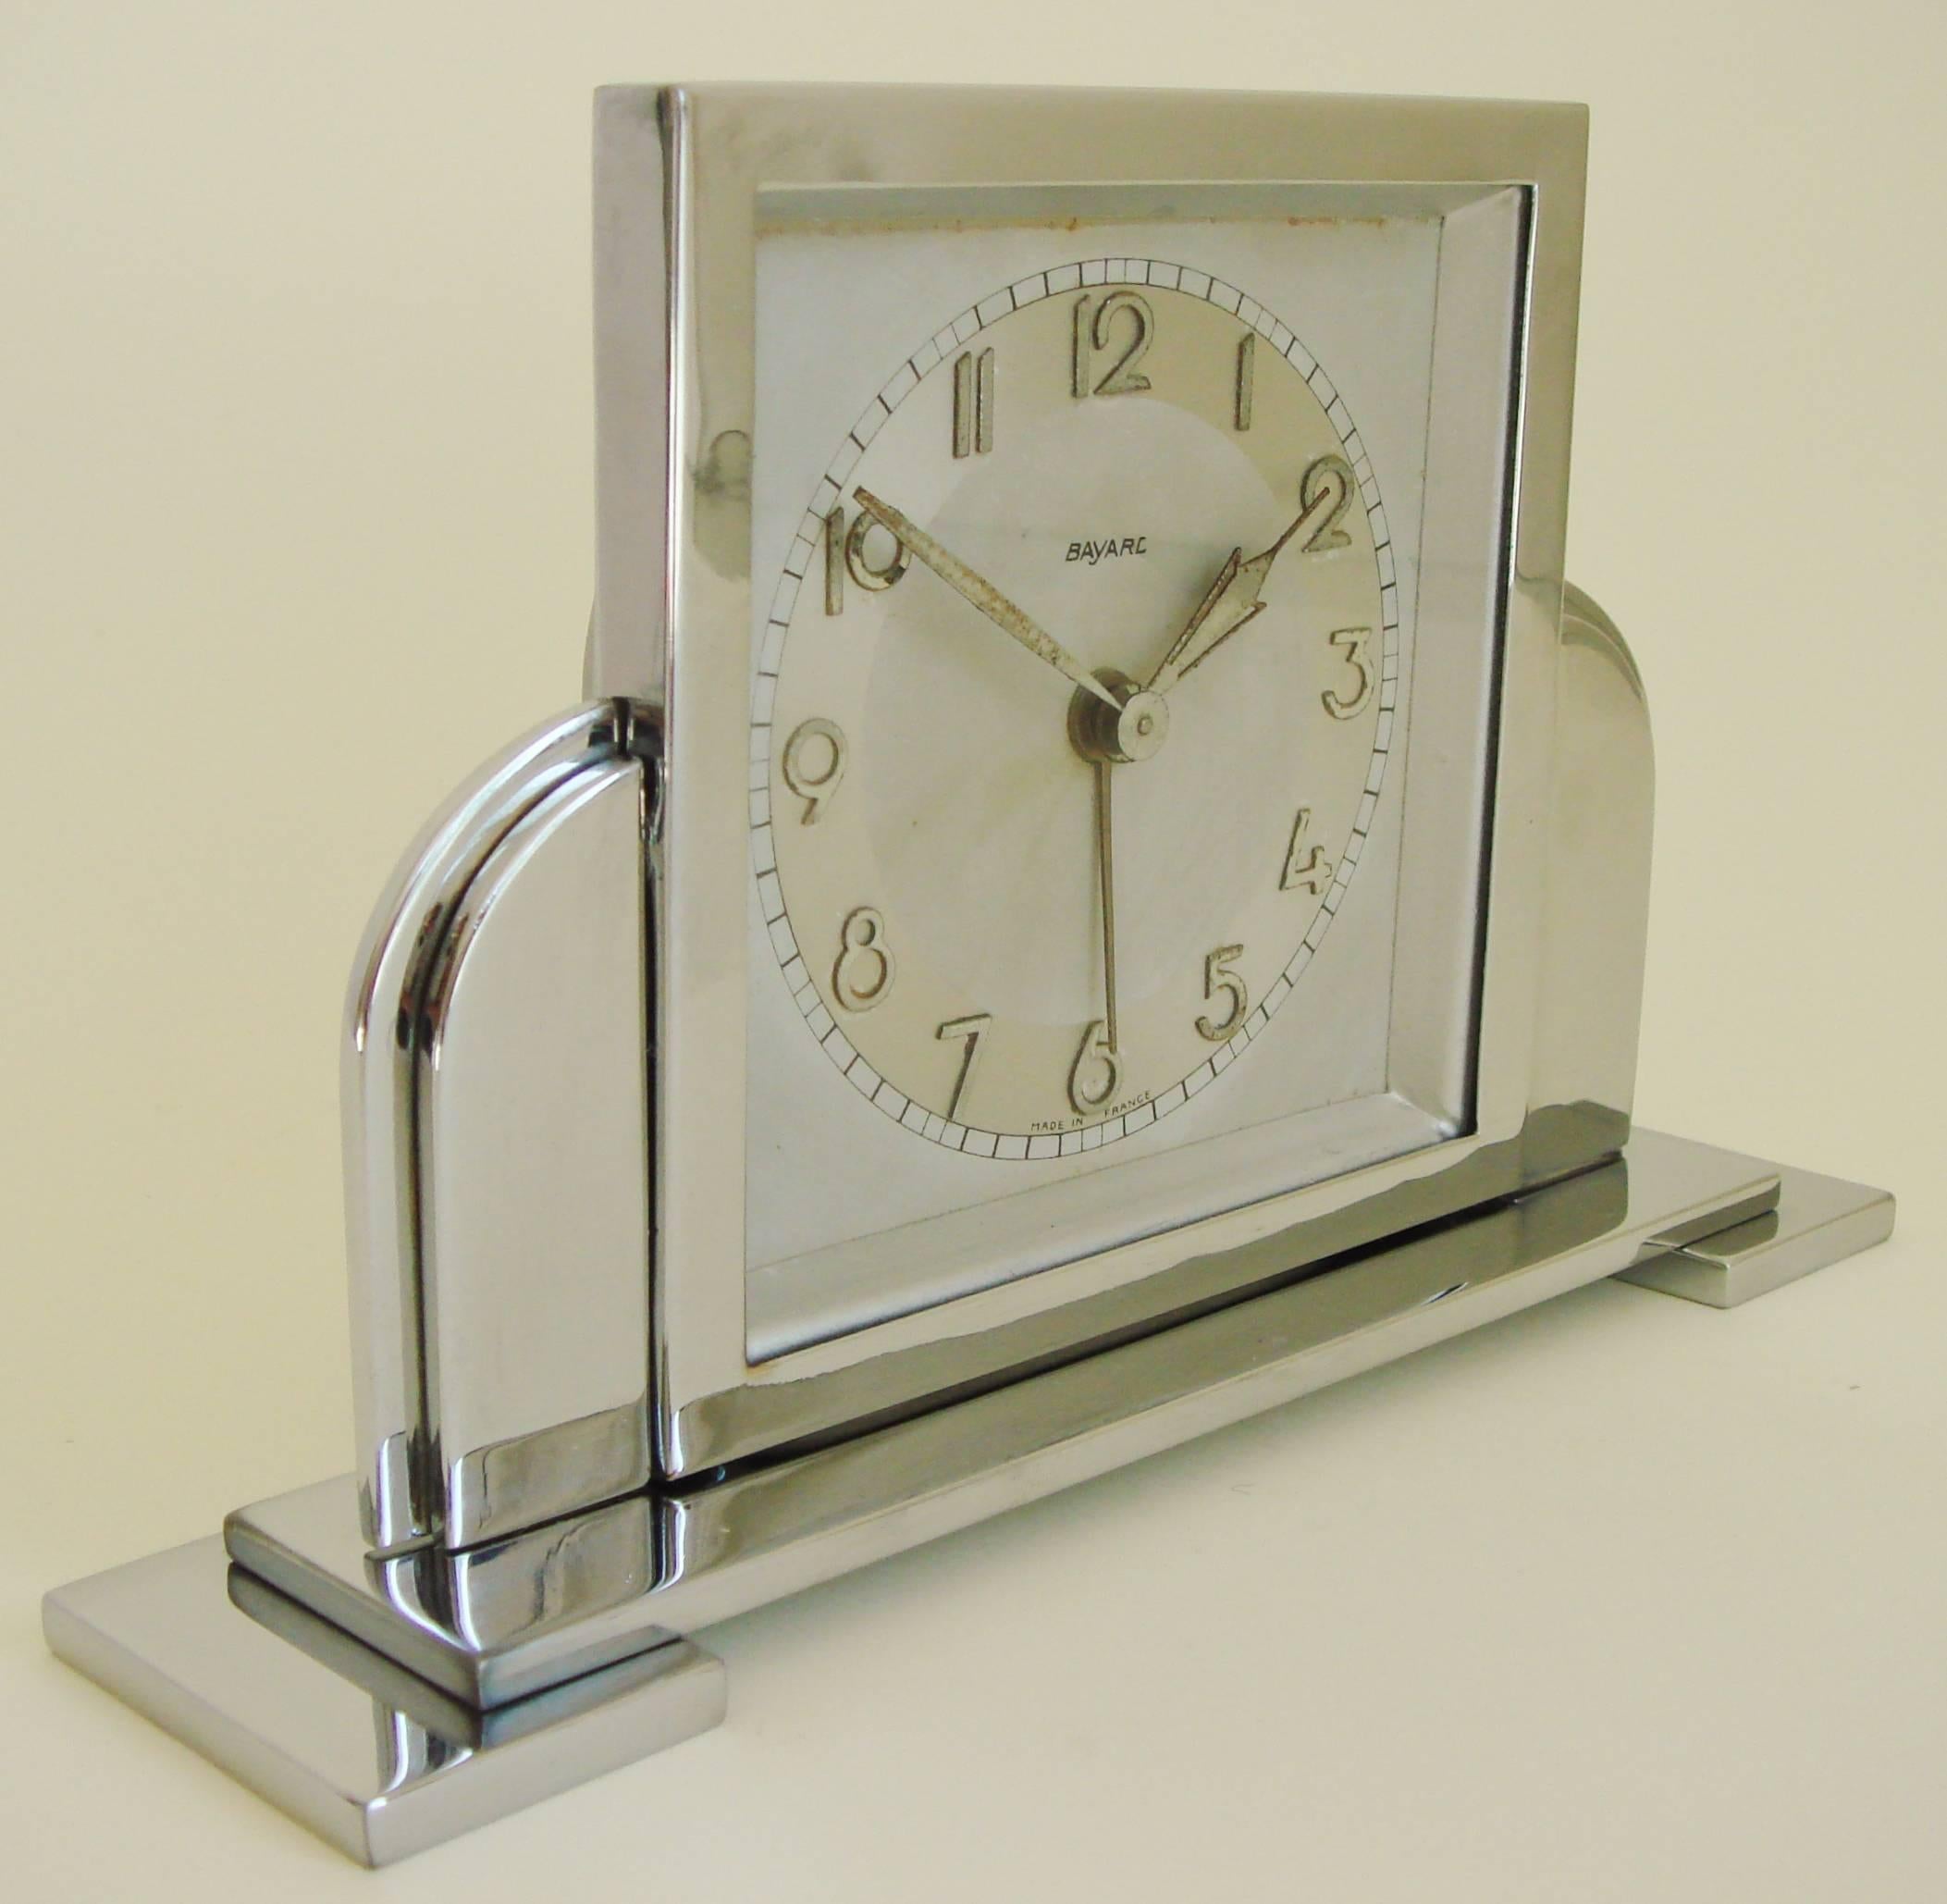 This delightful chrome-plated mid-sized mechanical alarm clock is by the renowned French clock-making firm of Bayard. The Art Deco face, crystal and all of the chrome is in wonderful condition with only the very stylish hands and numerals showing